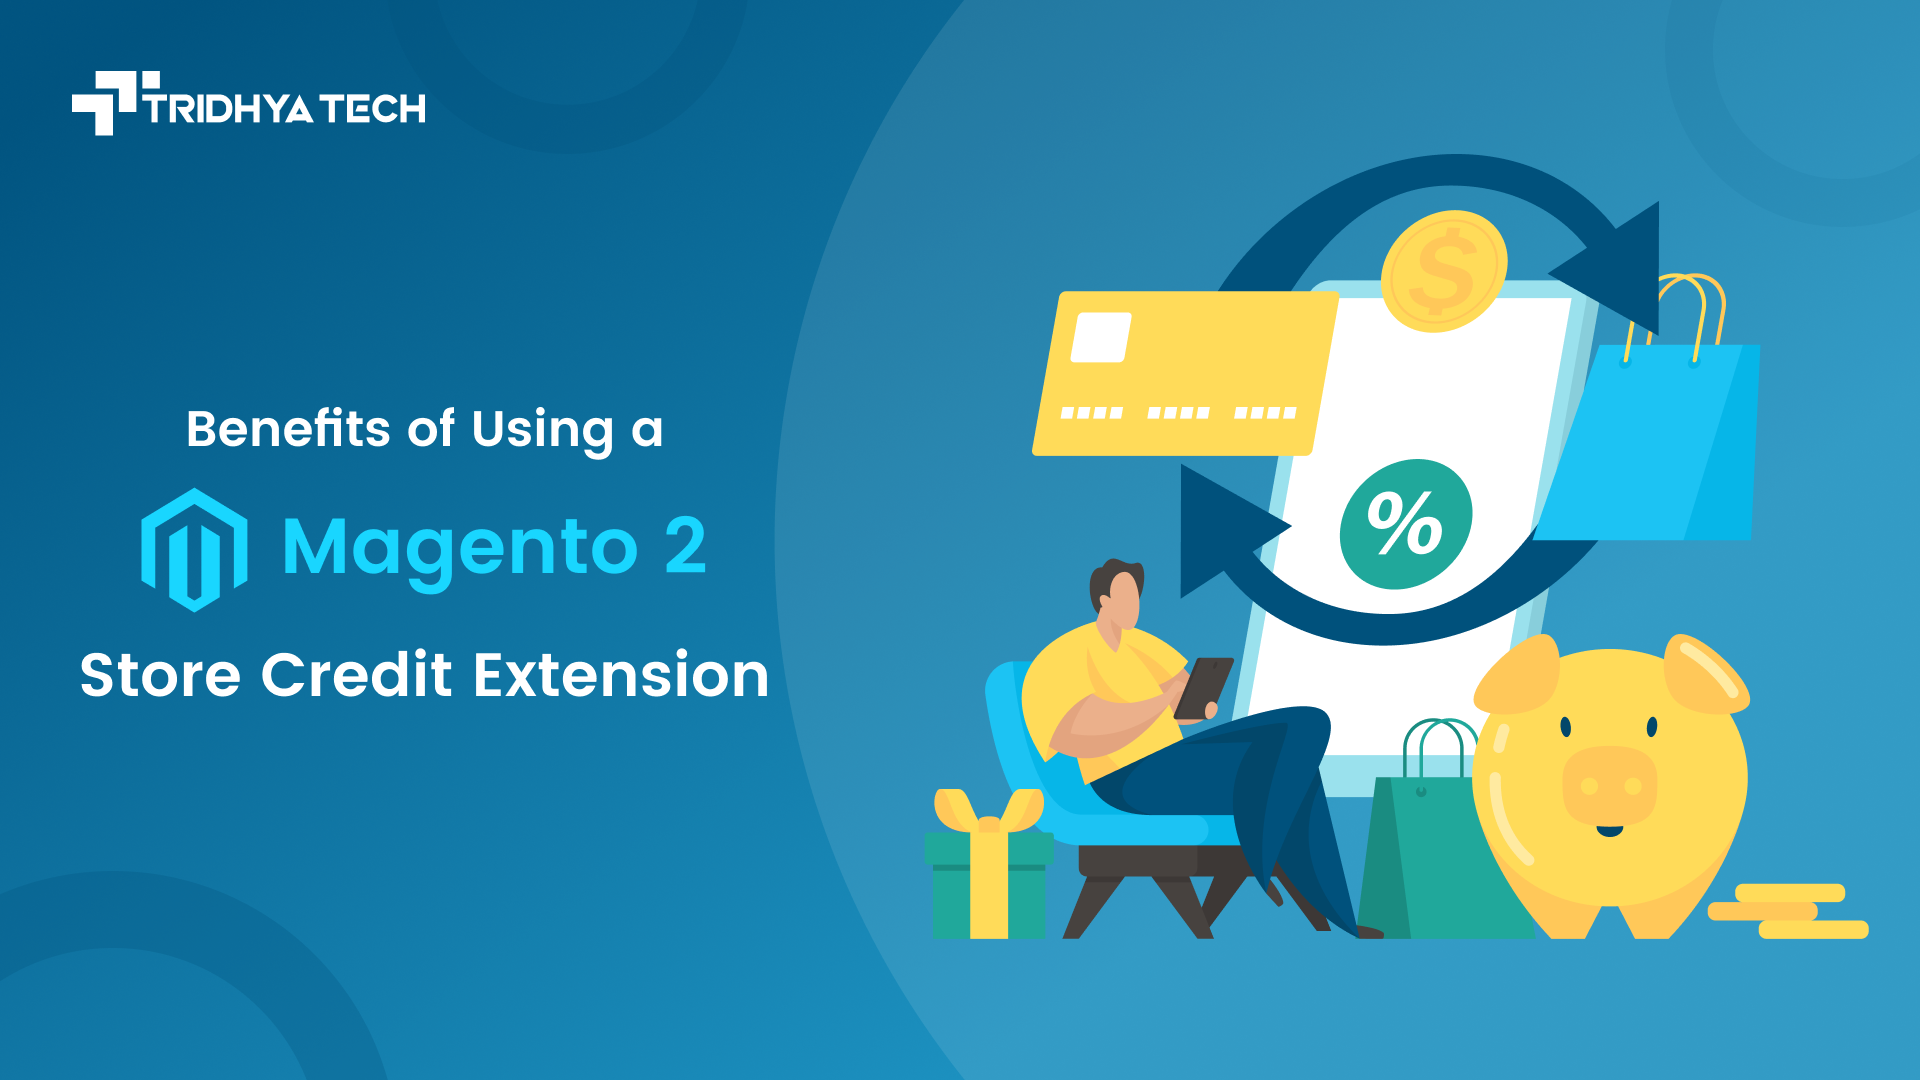 Benefits of Using a Magento 2 Store Credit Extension